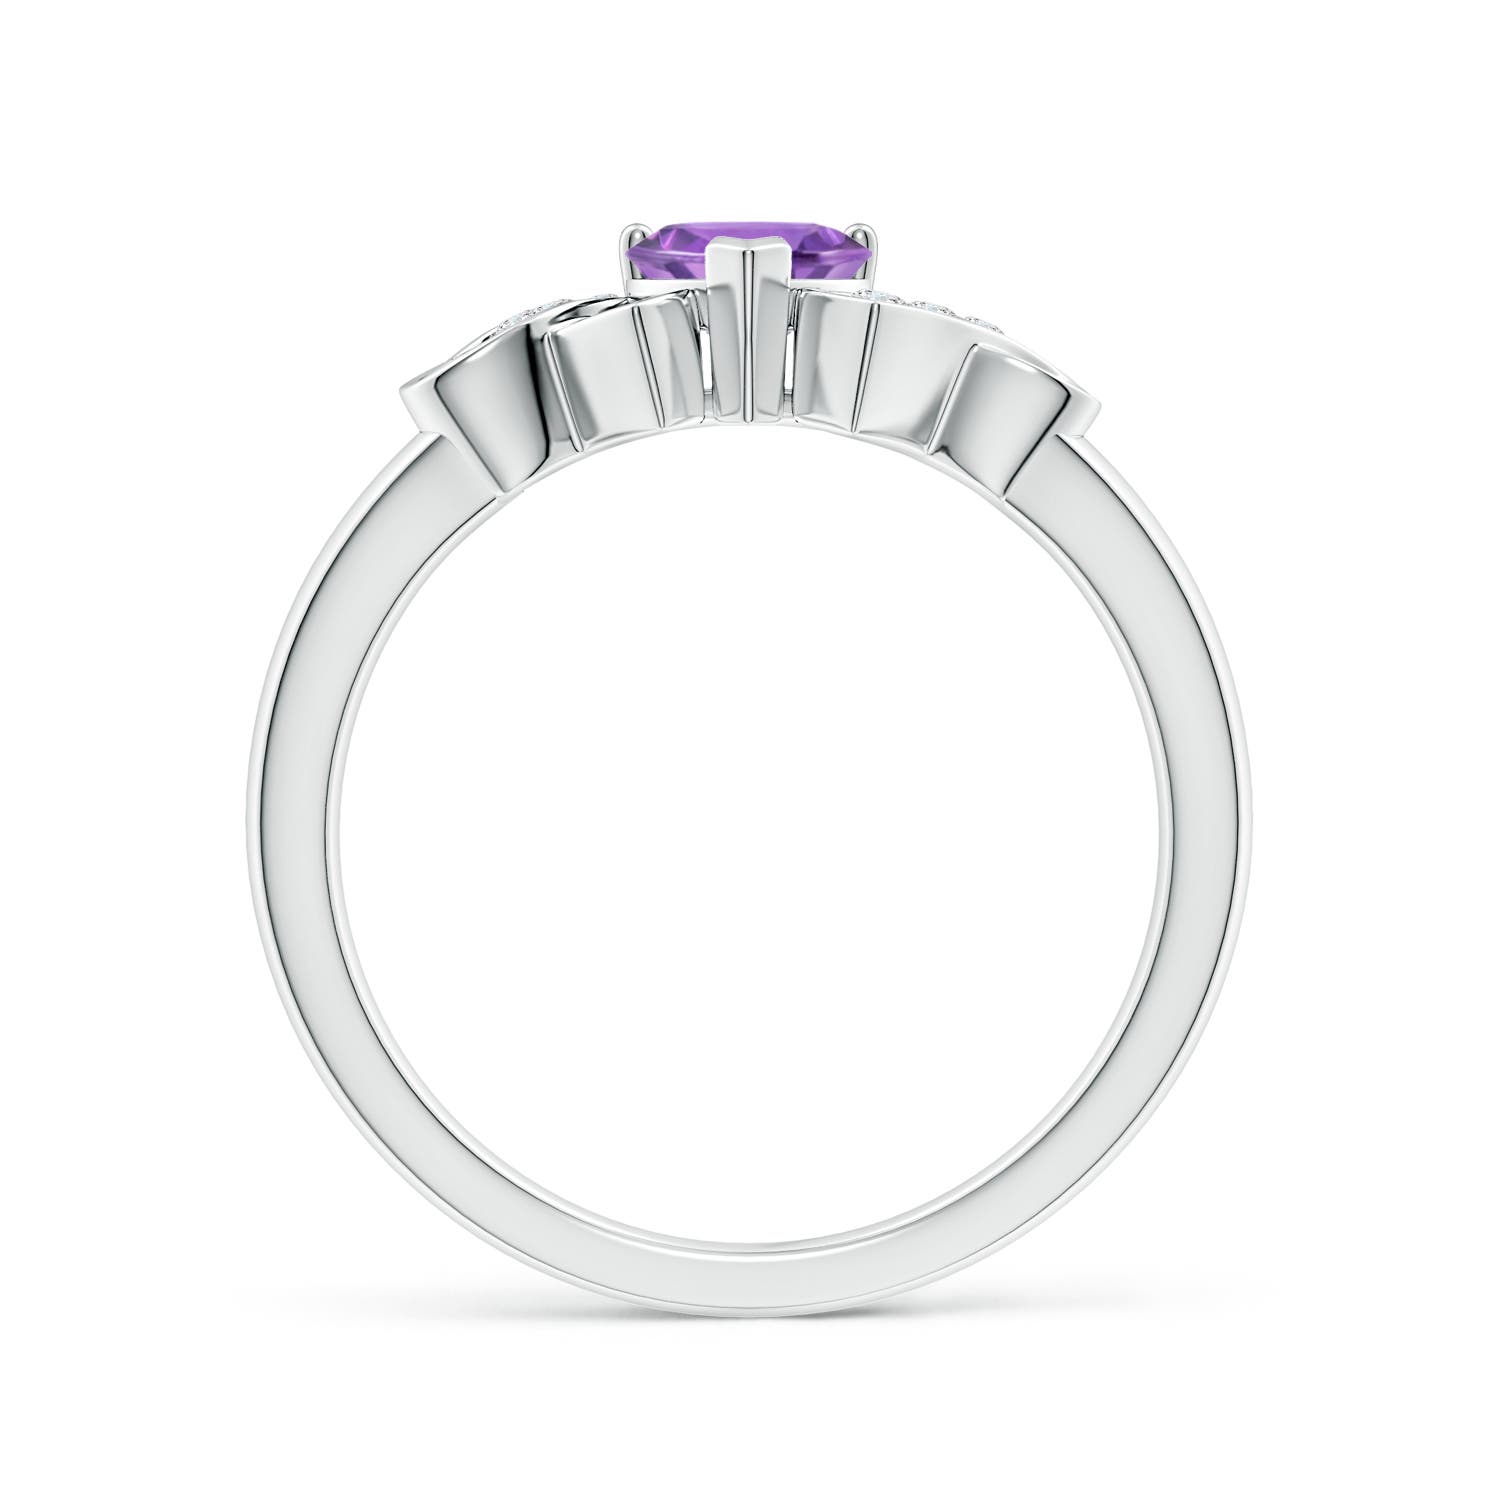 A - Amethyst / 0.41 CT / 14 KT White Gold